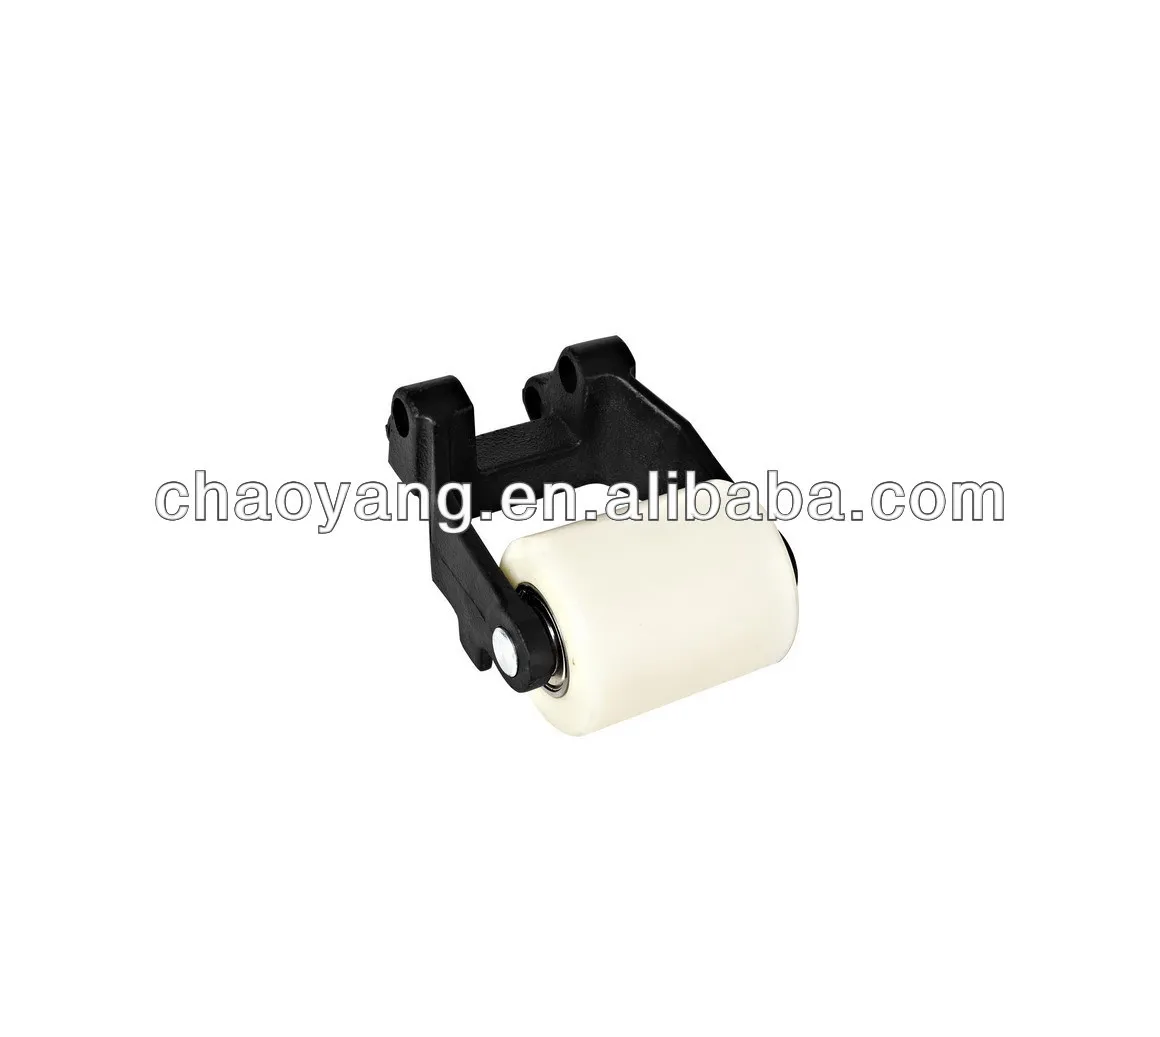 
Heavy Duty High Quality Drive Pu Loading Small Nylon Hand Pallet Truck Machinery Parts Rubber Wheel 